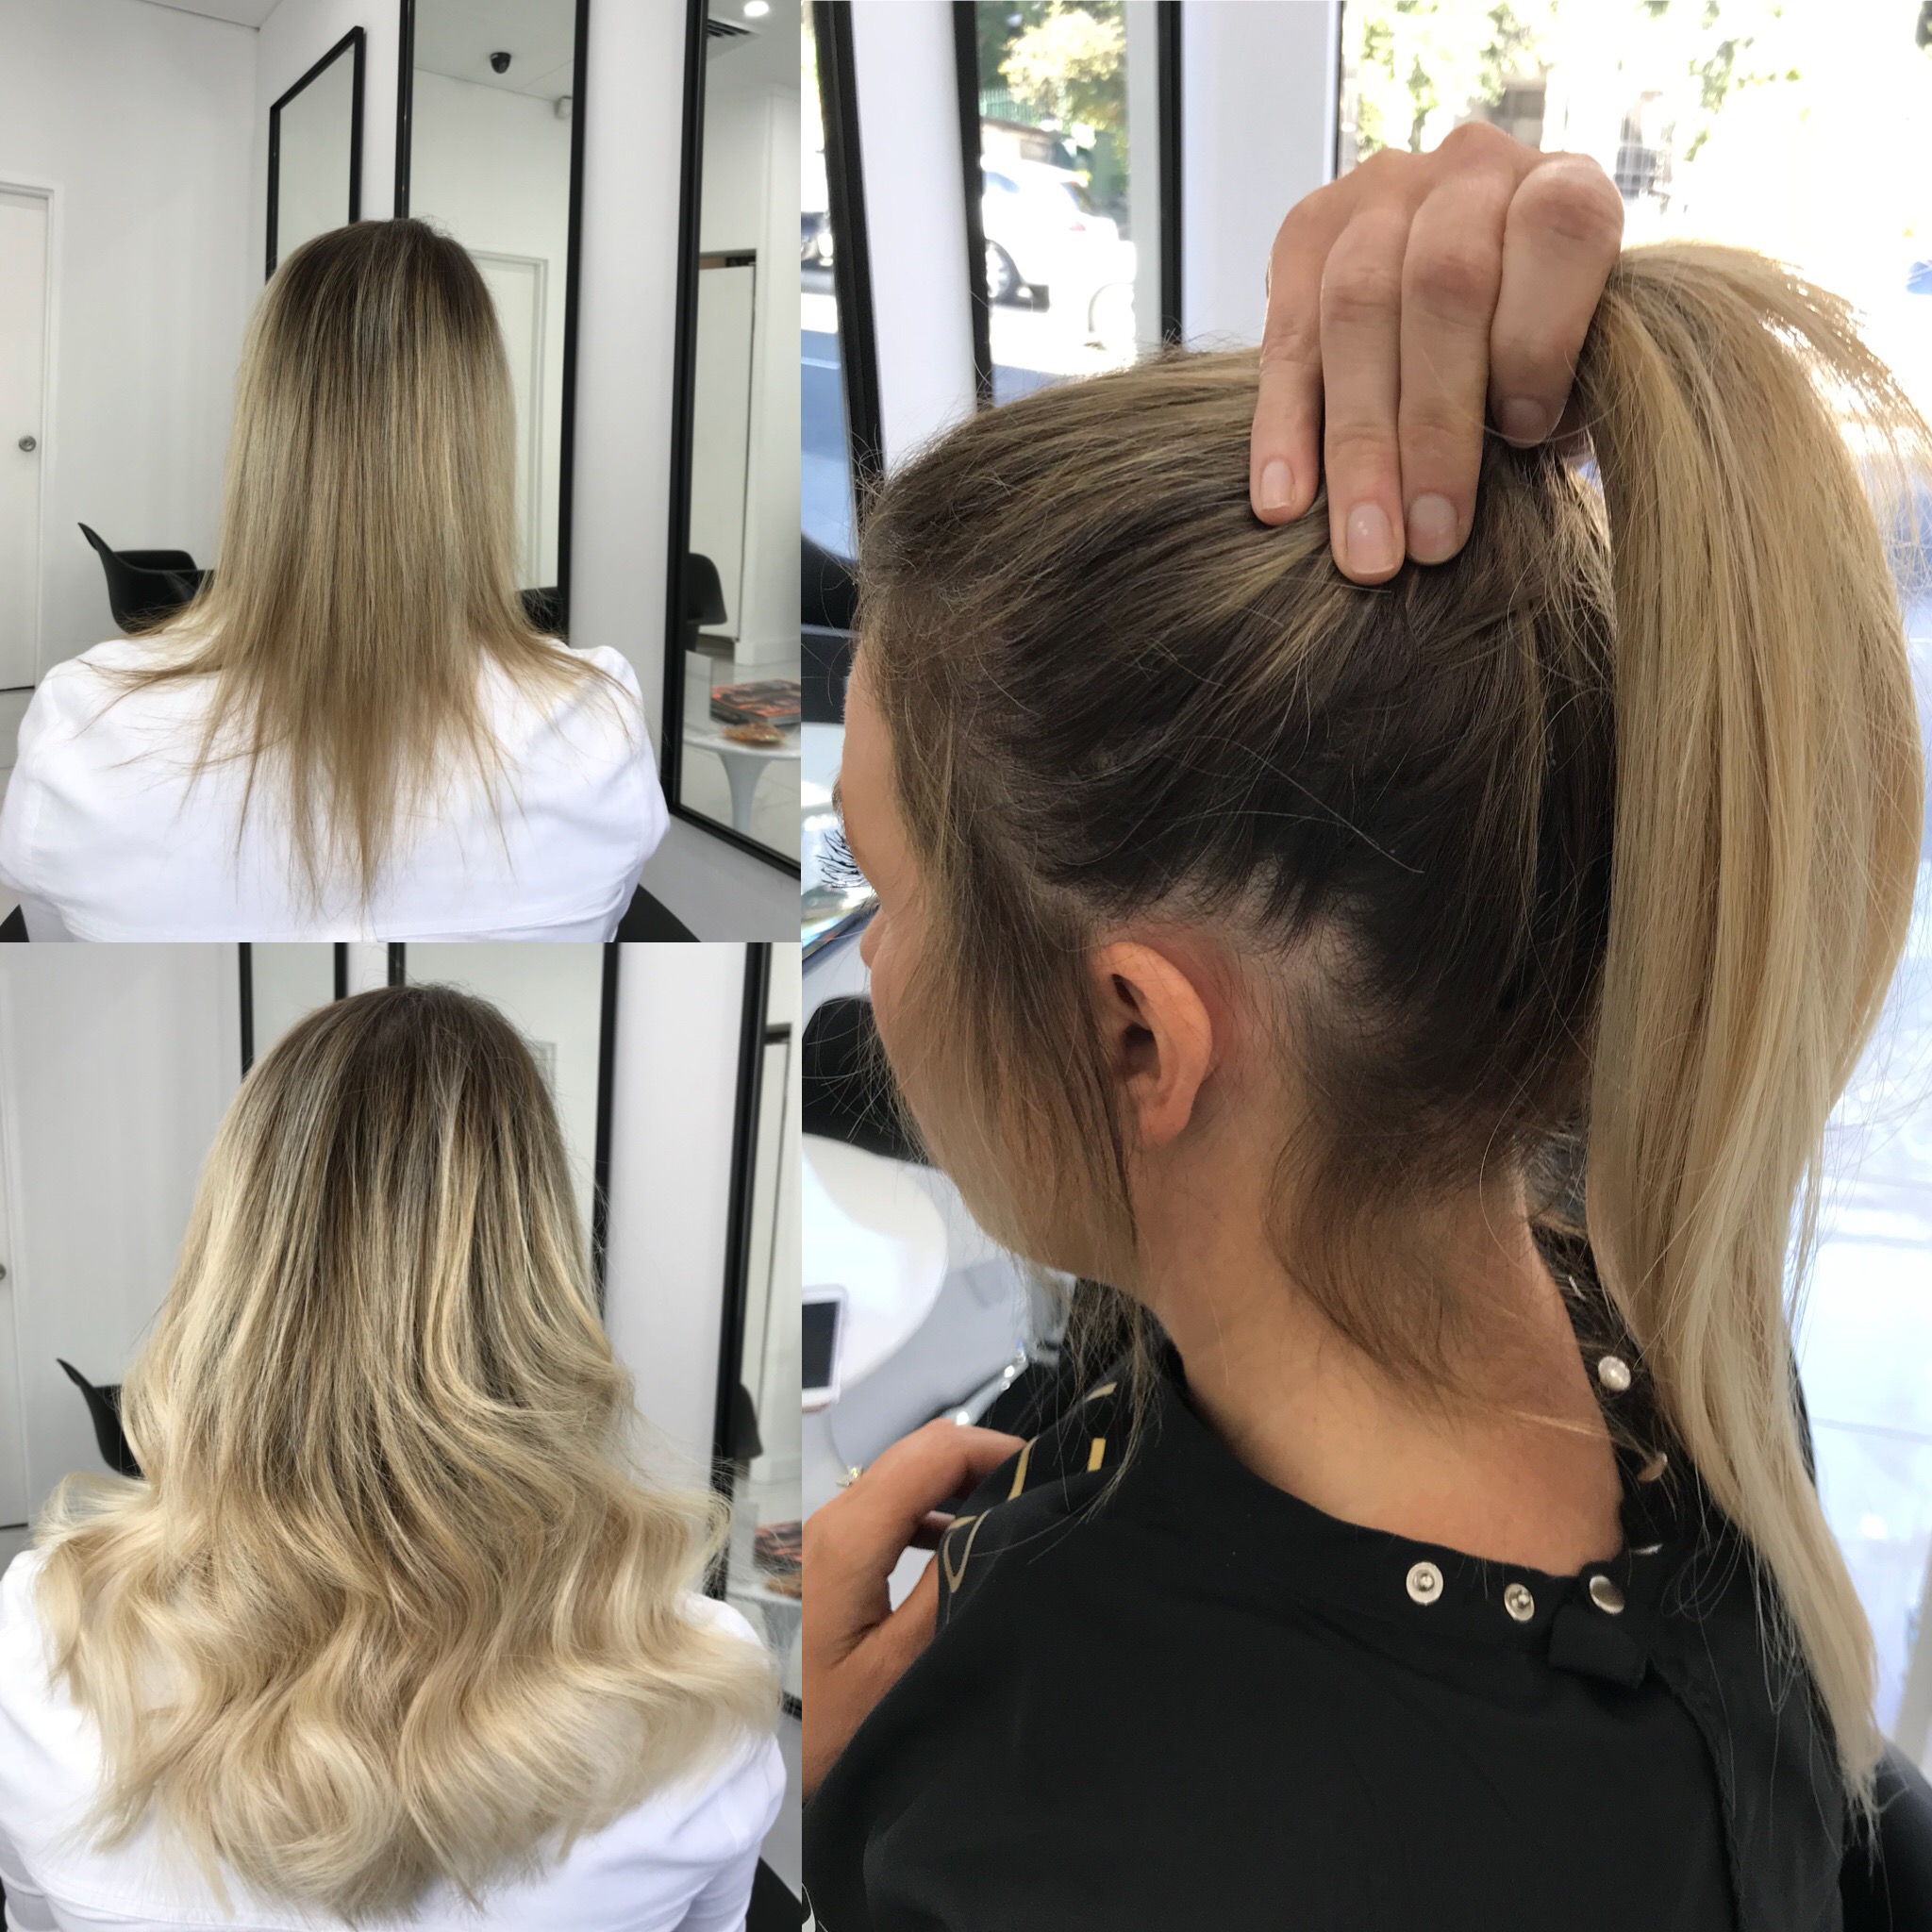 Nano Beads Hair Extensions Before and After Images - Australia's leading  Hair Extension Salon - Hair Extension Bar